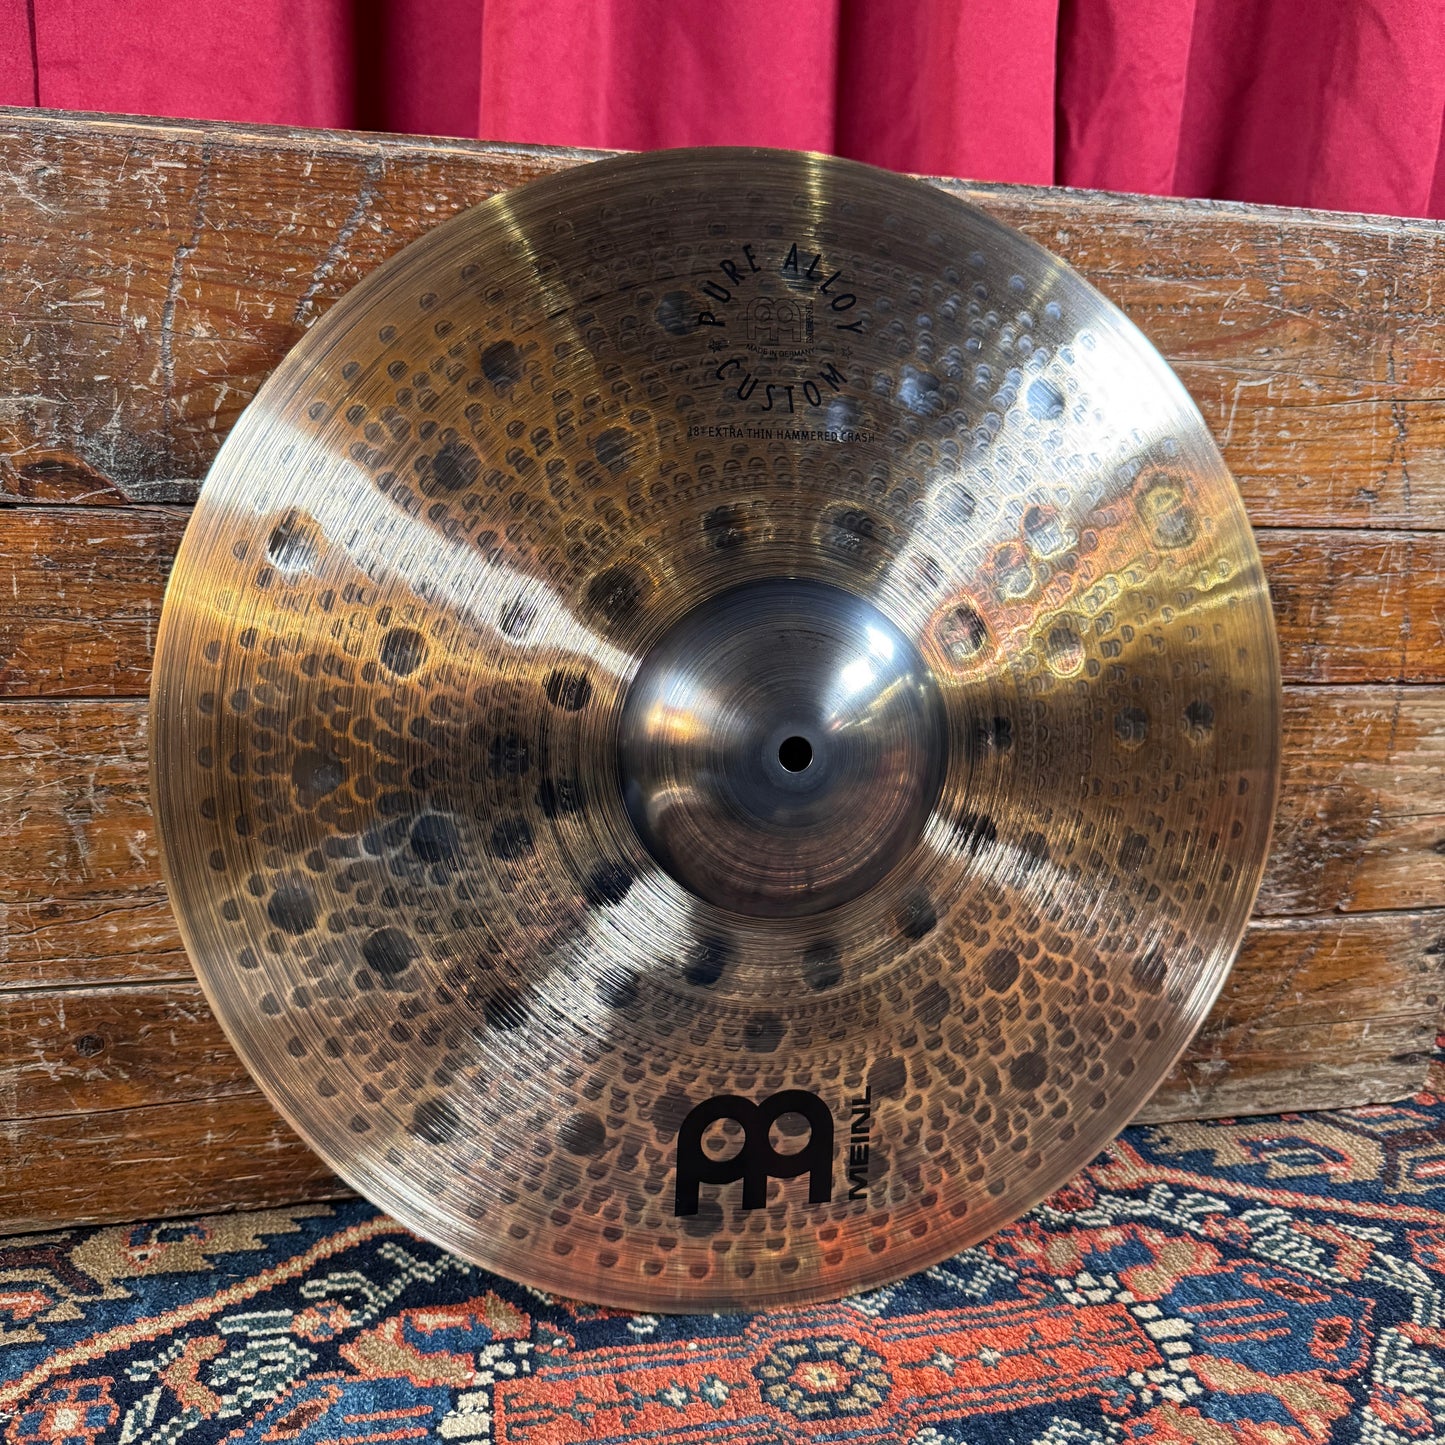 18" Meinl Pure Alloy Custom Extra Thin Hammered Crash Cymbal 1076g *Video Demo*